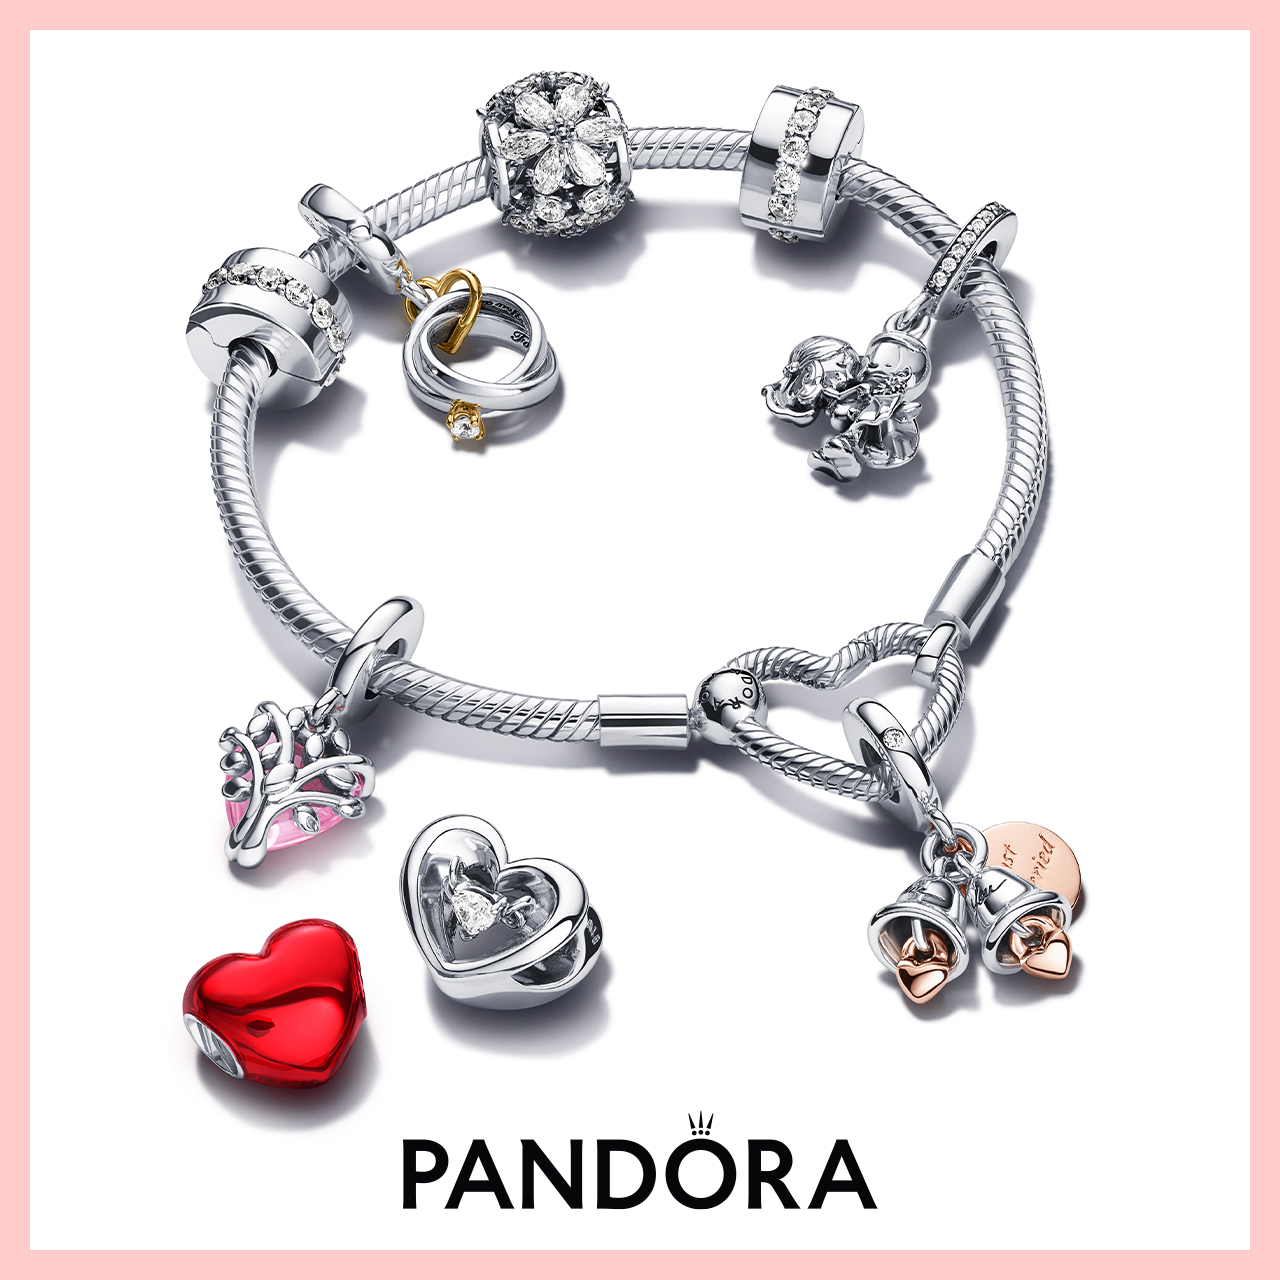 Pandora Campaign 96 Find a gift to celebrate the big day EN 1280x1280 1